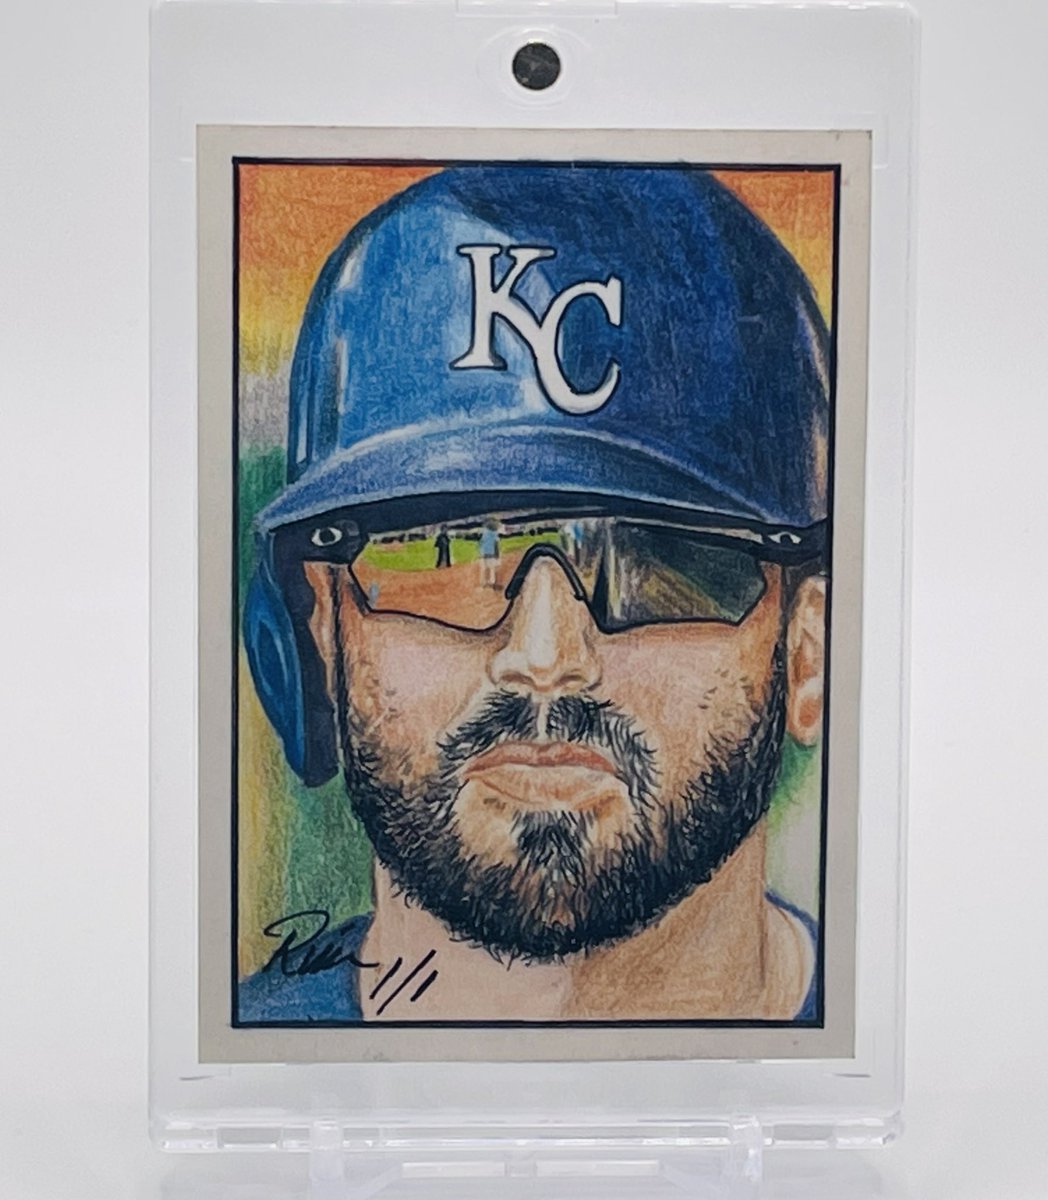 @OldTownCards I don’t have much either but what @rikkcarl10 put together for me is still my favorite. The reflection in the shades is top-notch!